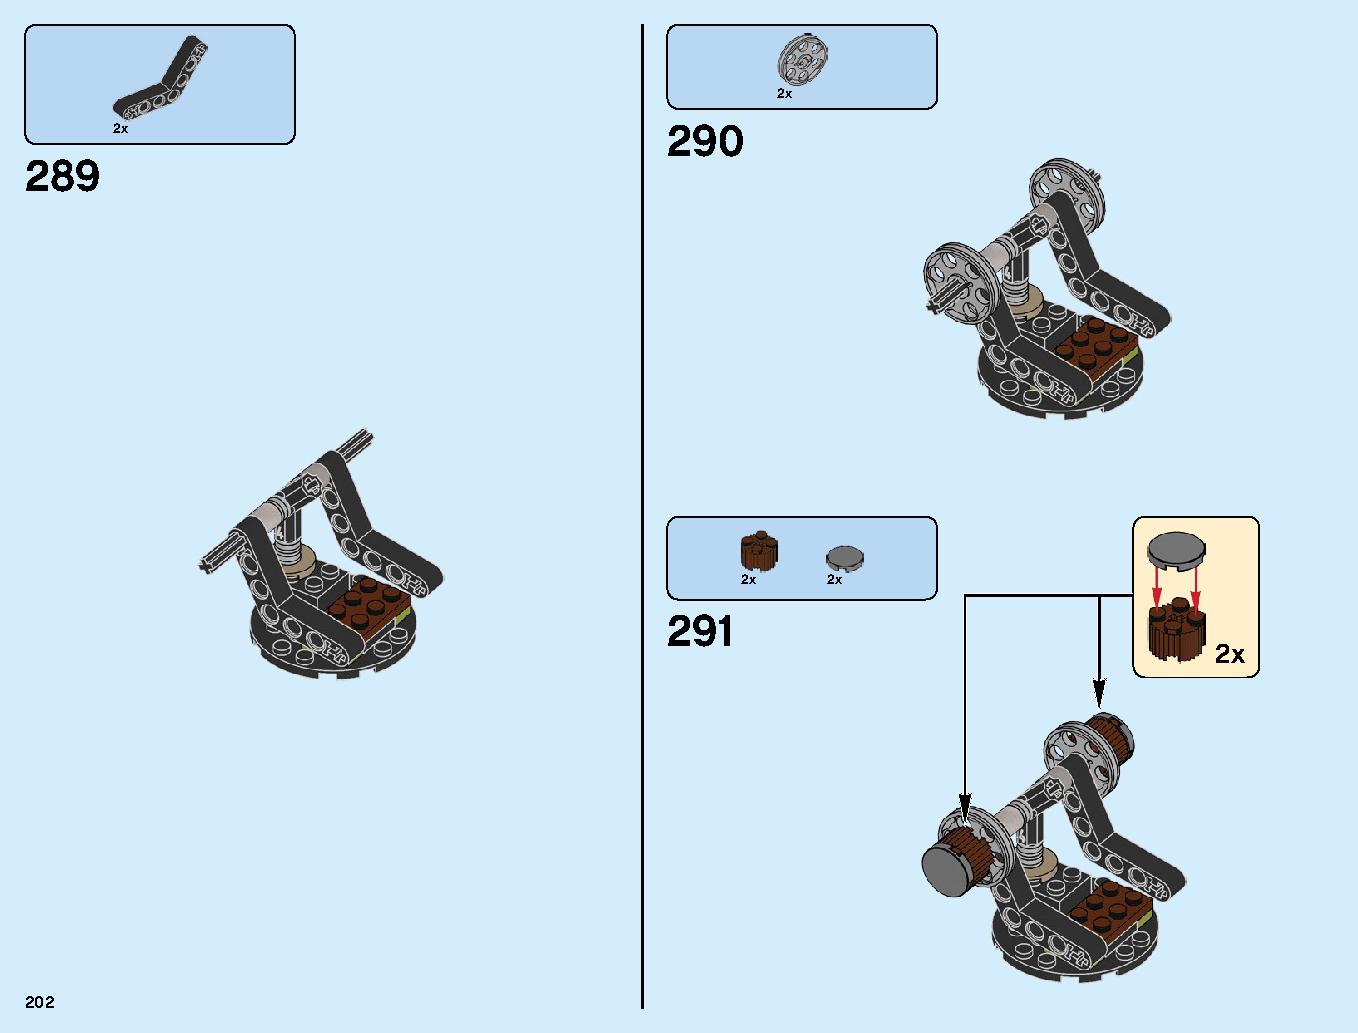 Dragon Pit 70655 LEGO information LEGO instructions 202 page